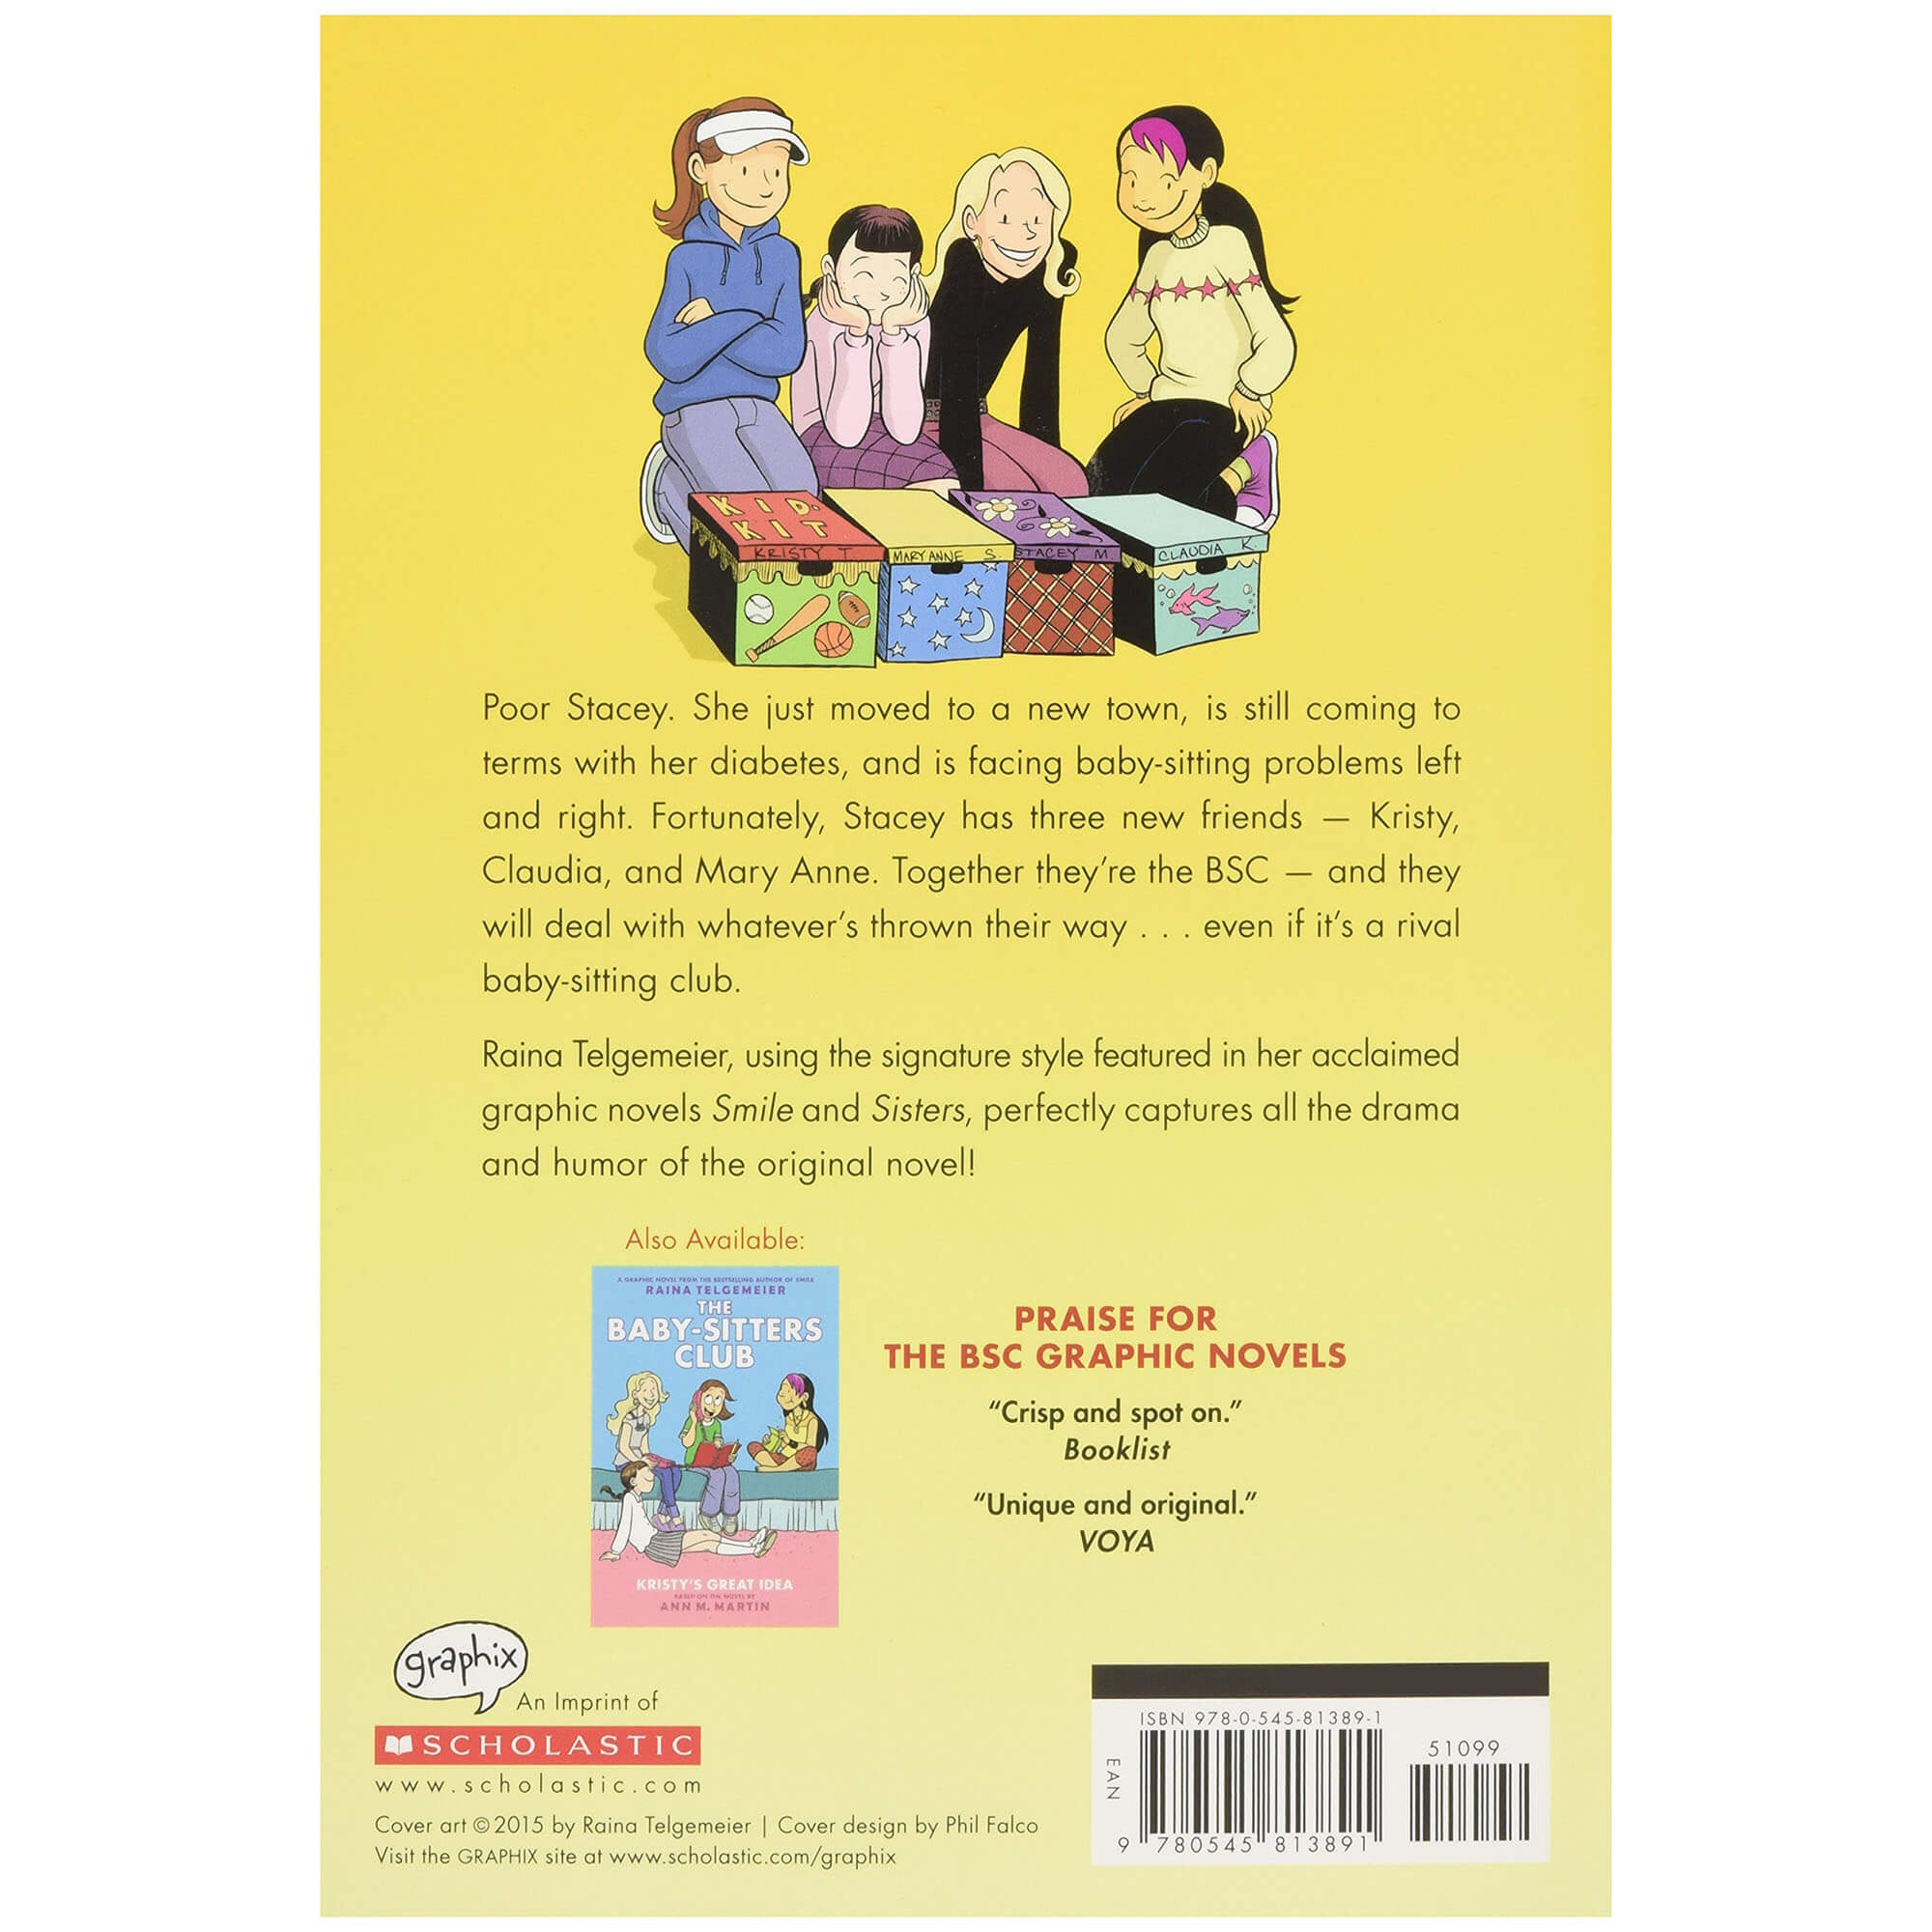 The Truth About Stacey (The Baby-Sitters Club Graphic Novel #2)